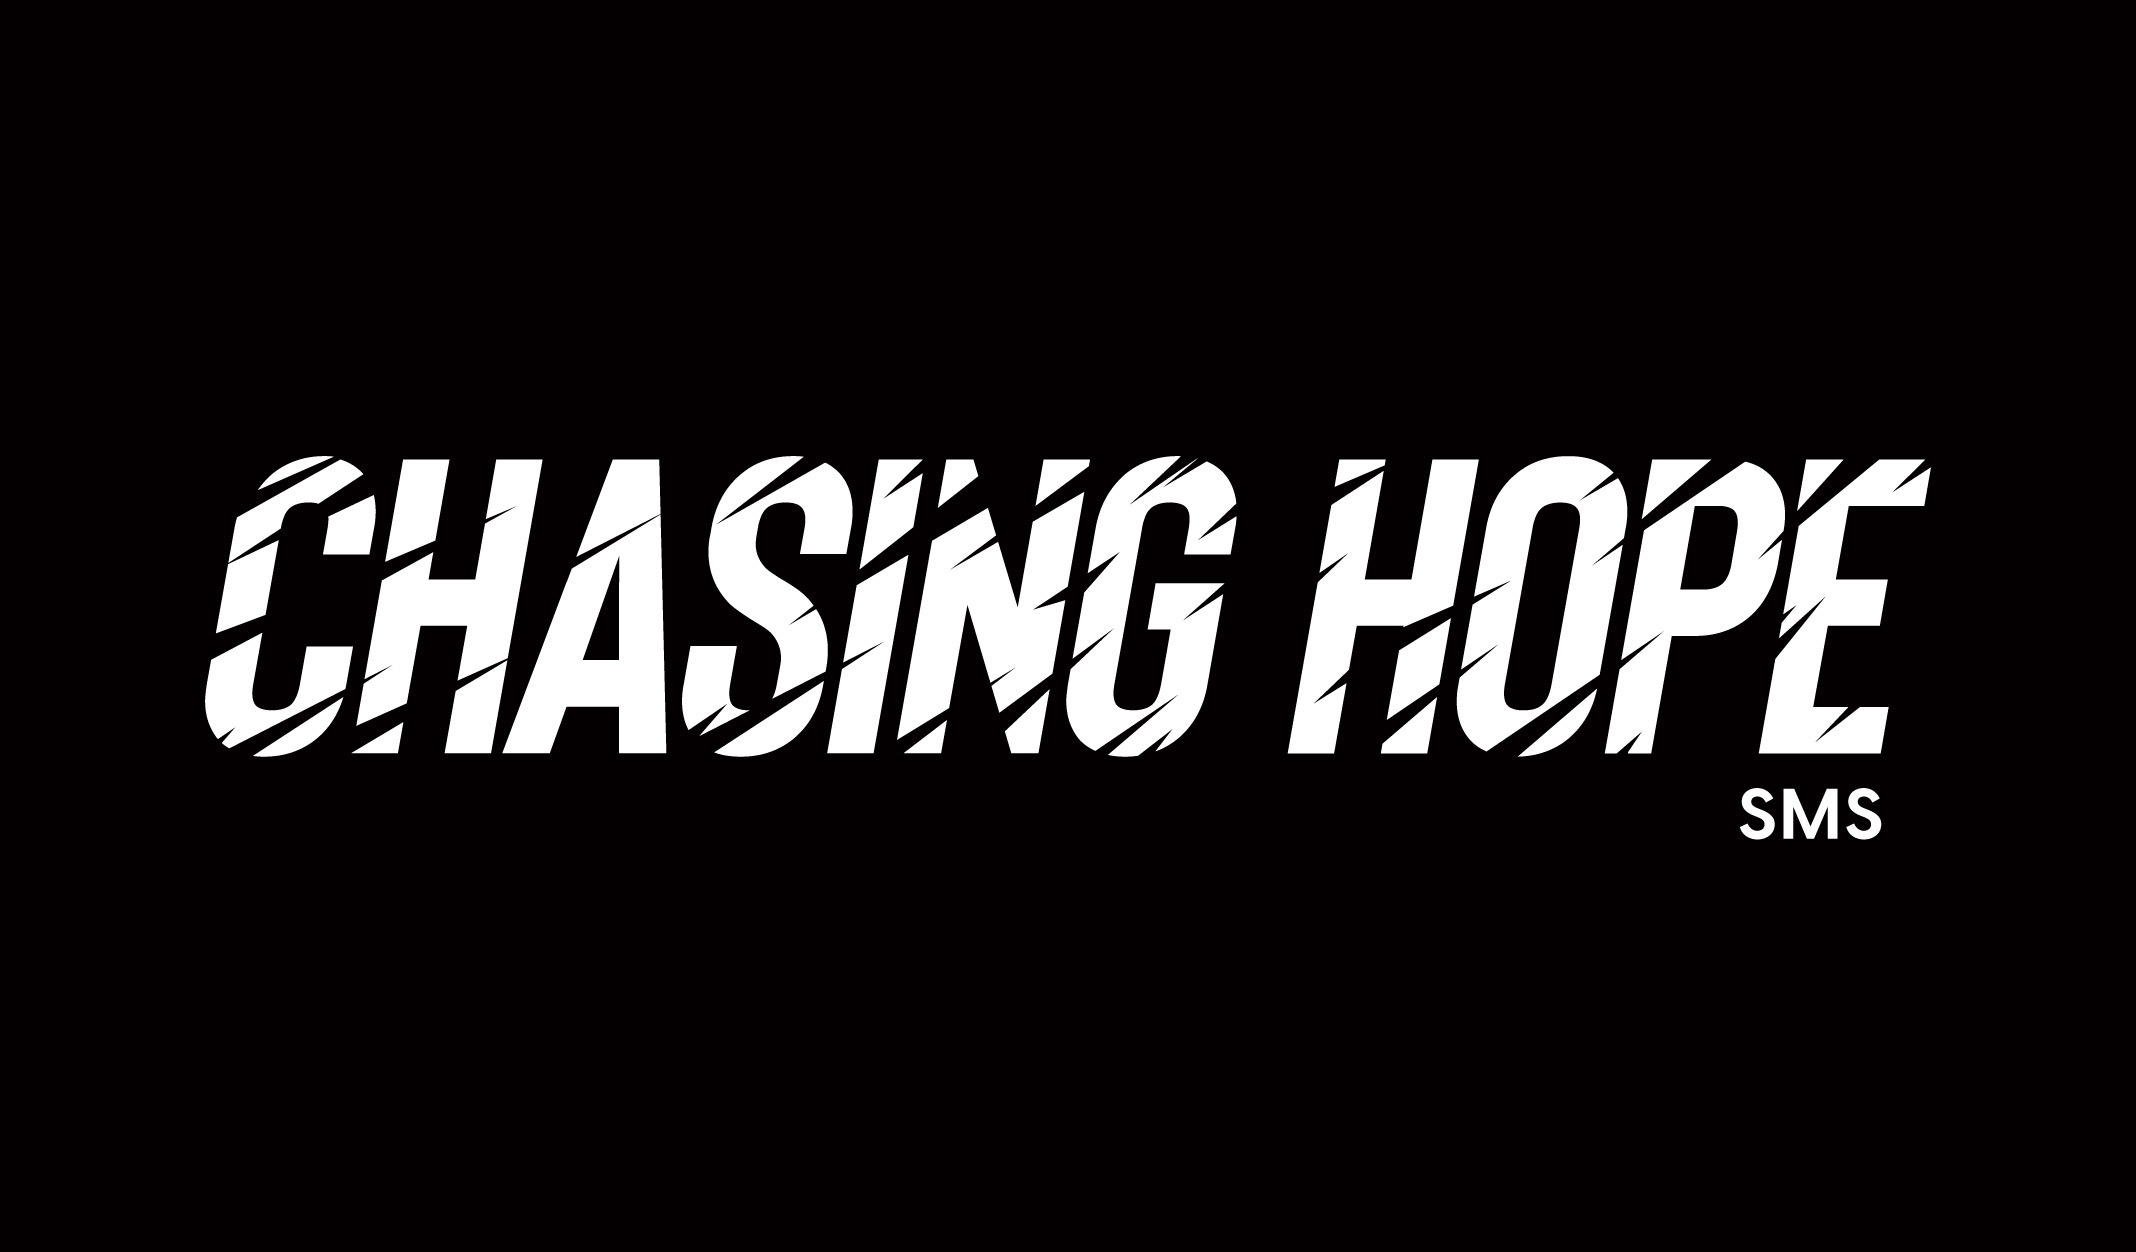 Chasing Hope SMS 